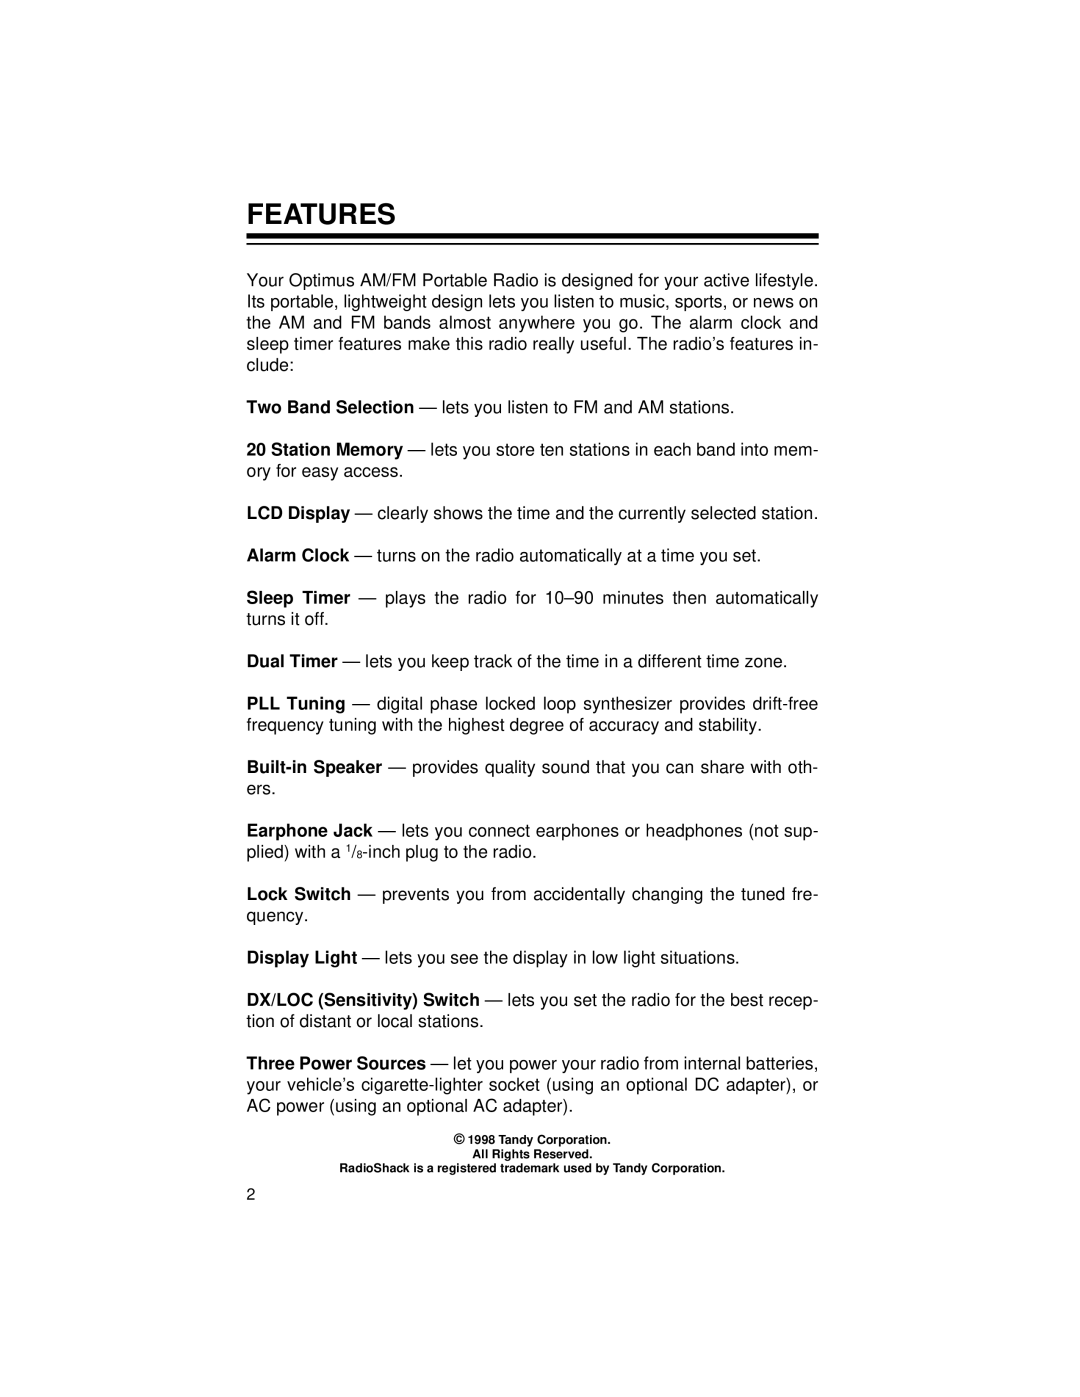 Radio Shack Radio owner manual Features, Tandy Corporation All Rights Reserved 